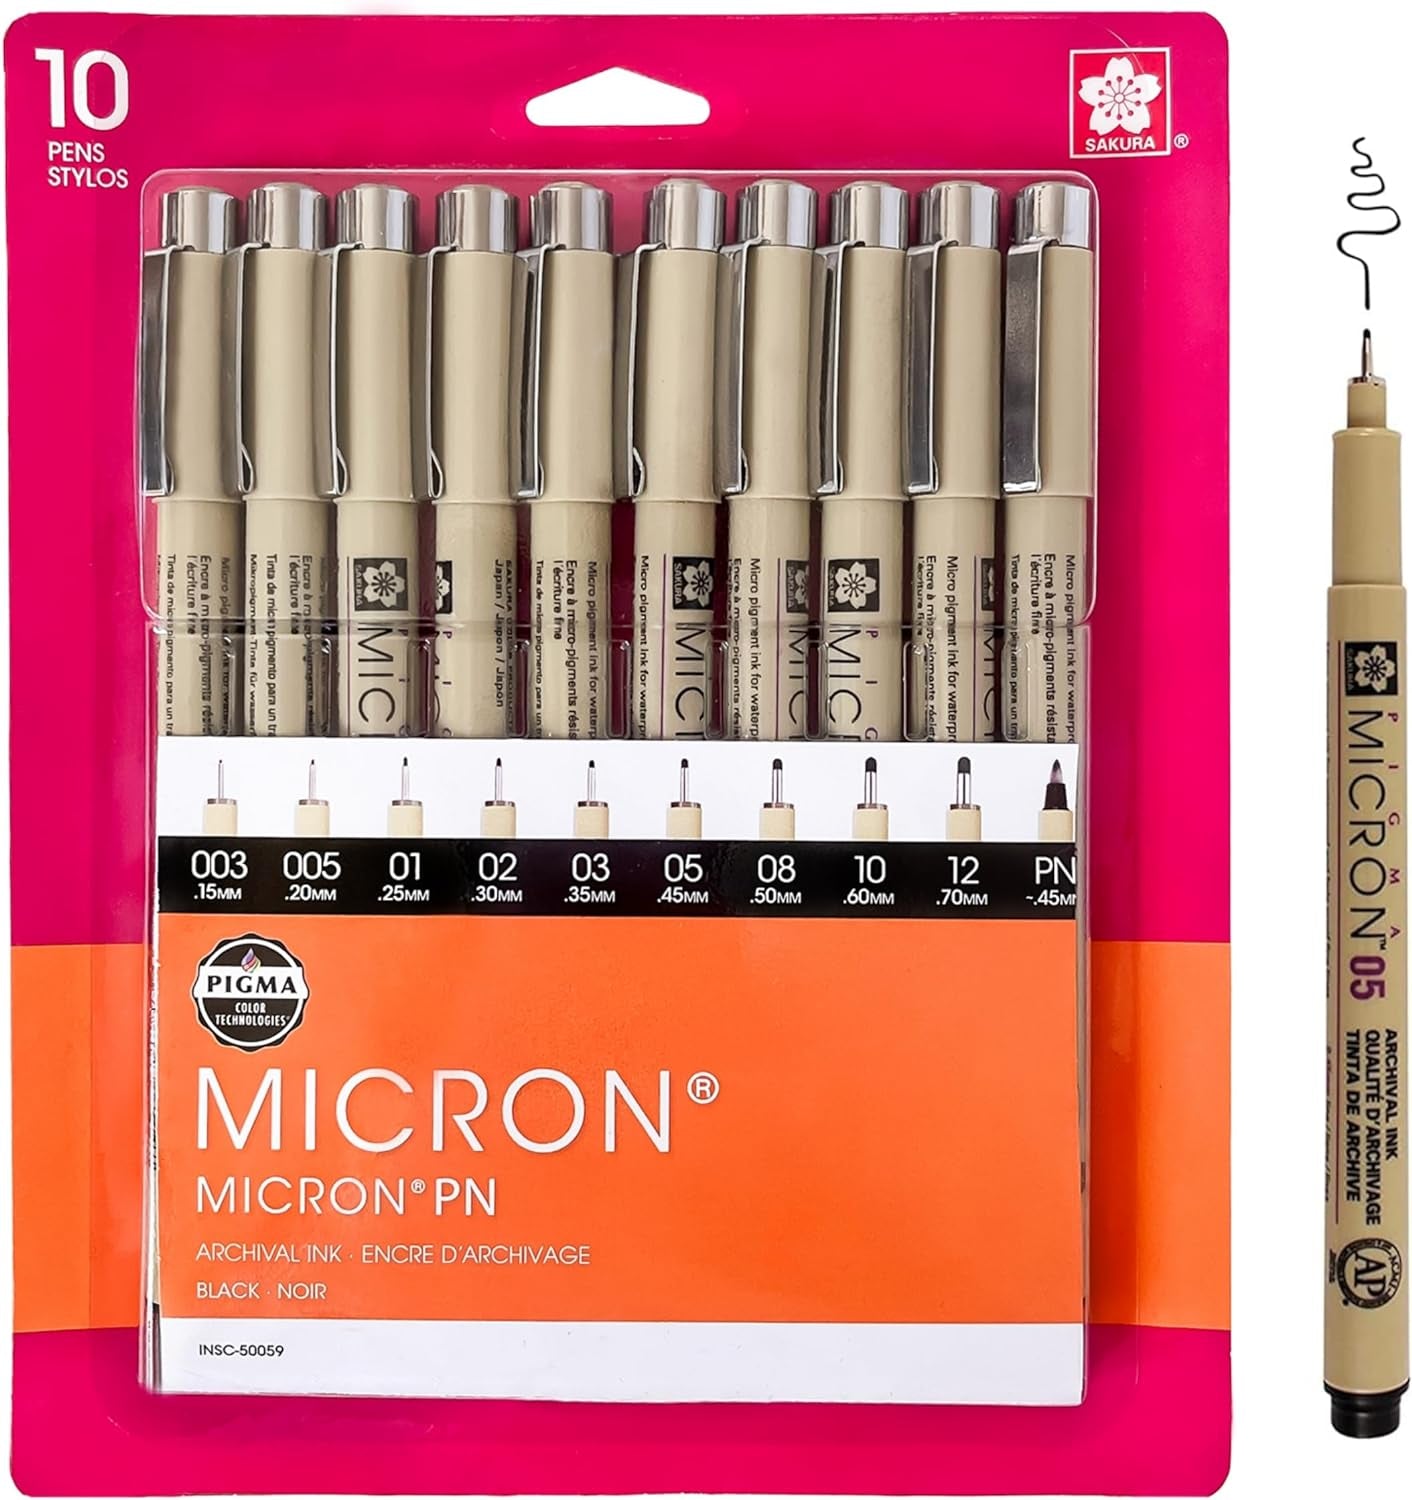 Pigma Micron Fineliner Pens - Archival Black Ink Pens - Pens for Writing, Drawing, or Journaling - Assorted Point Sizes - 8 Pack